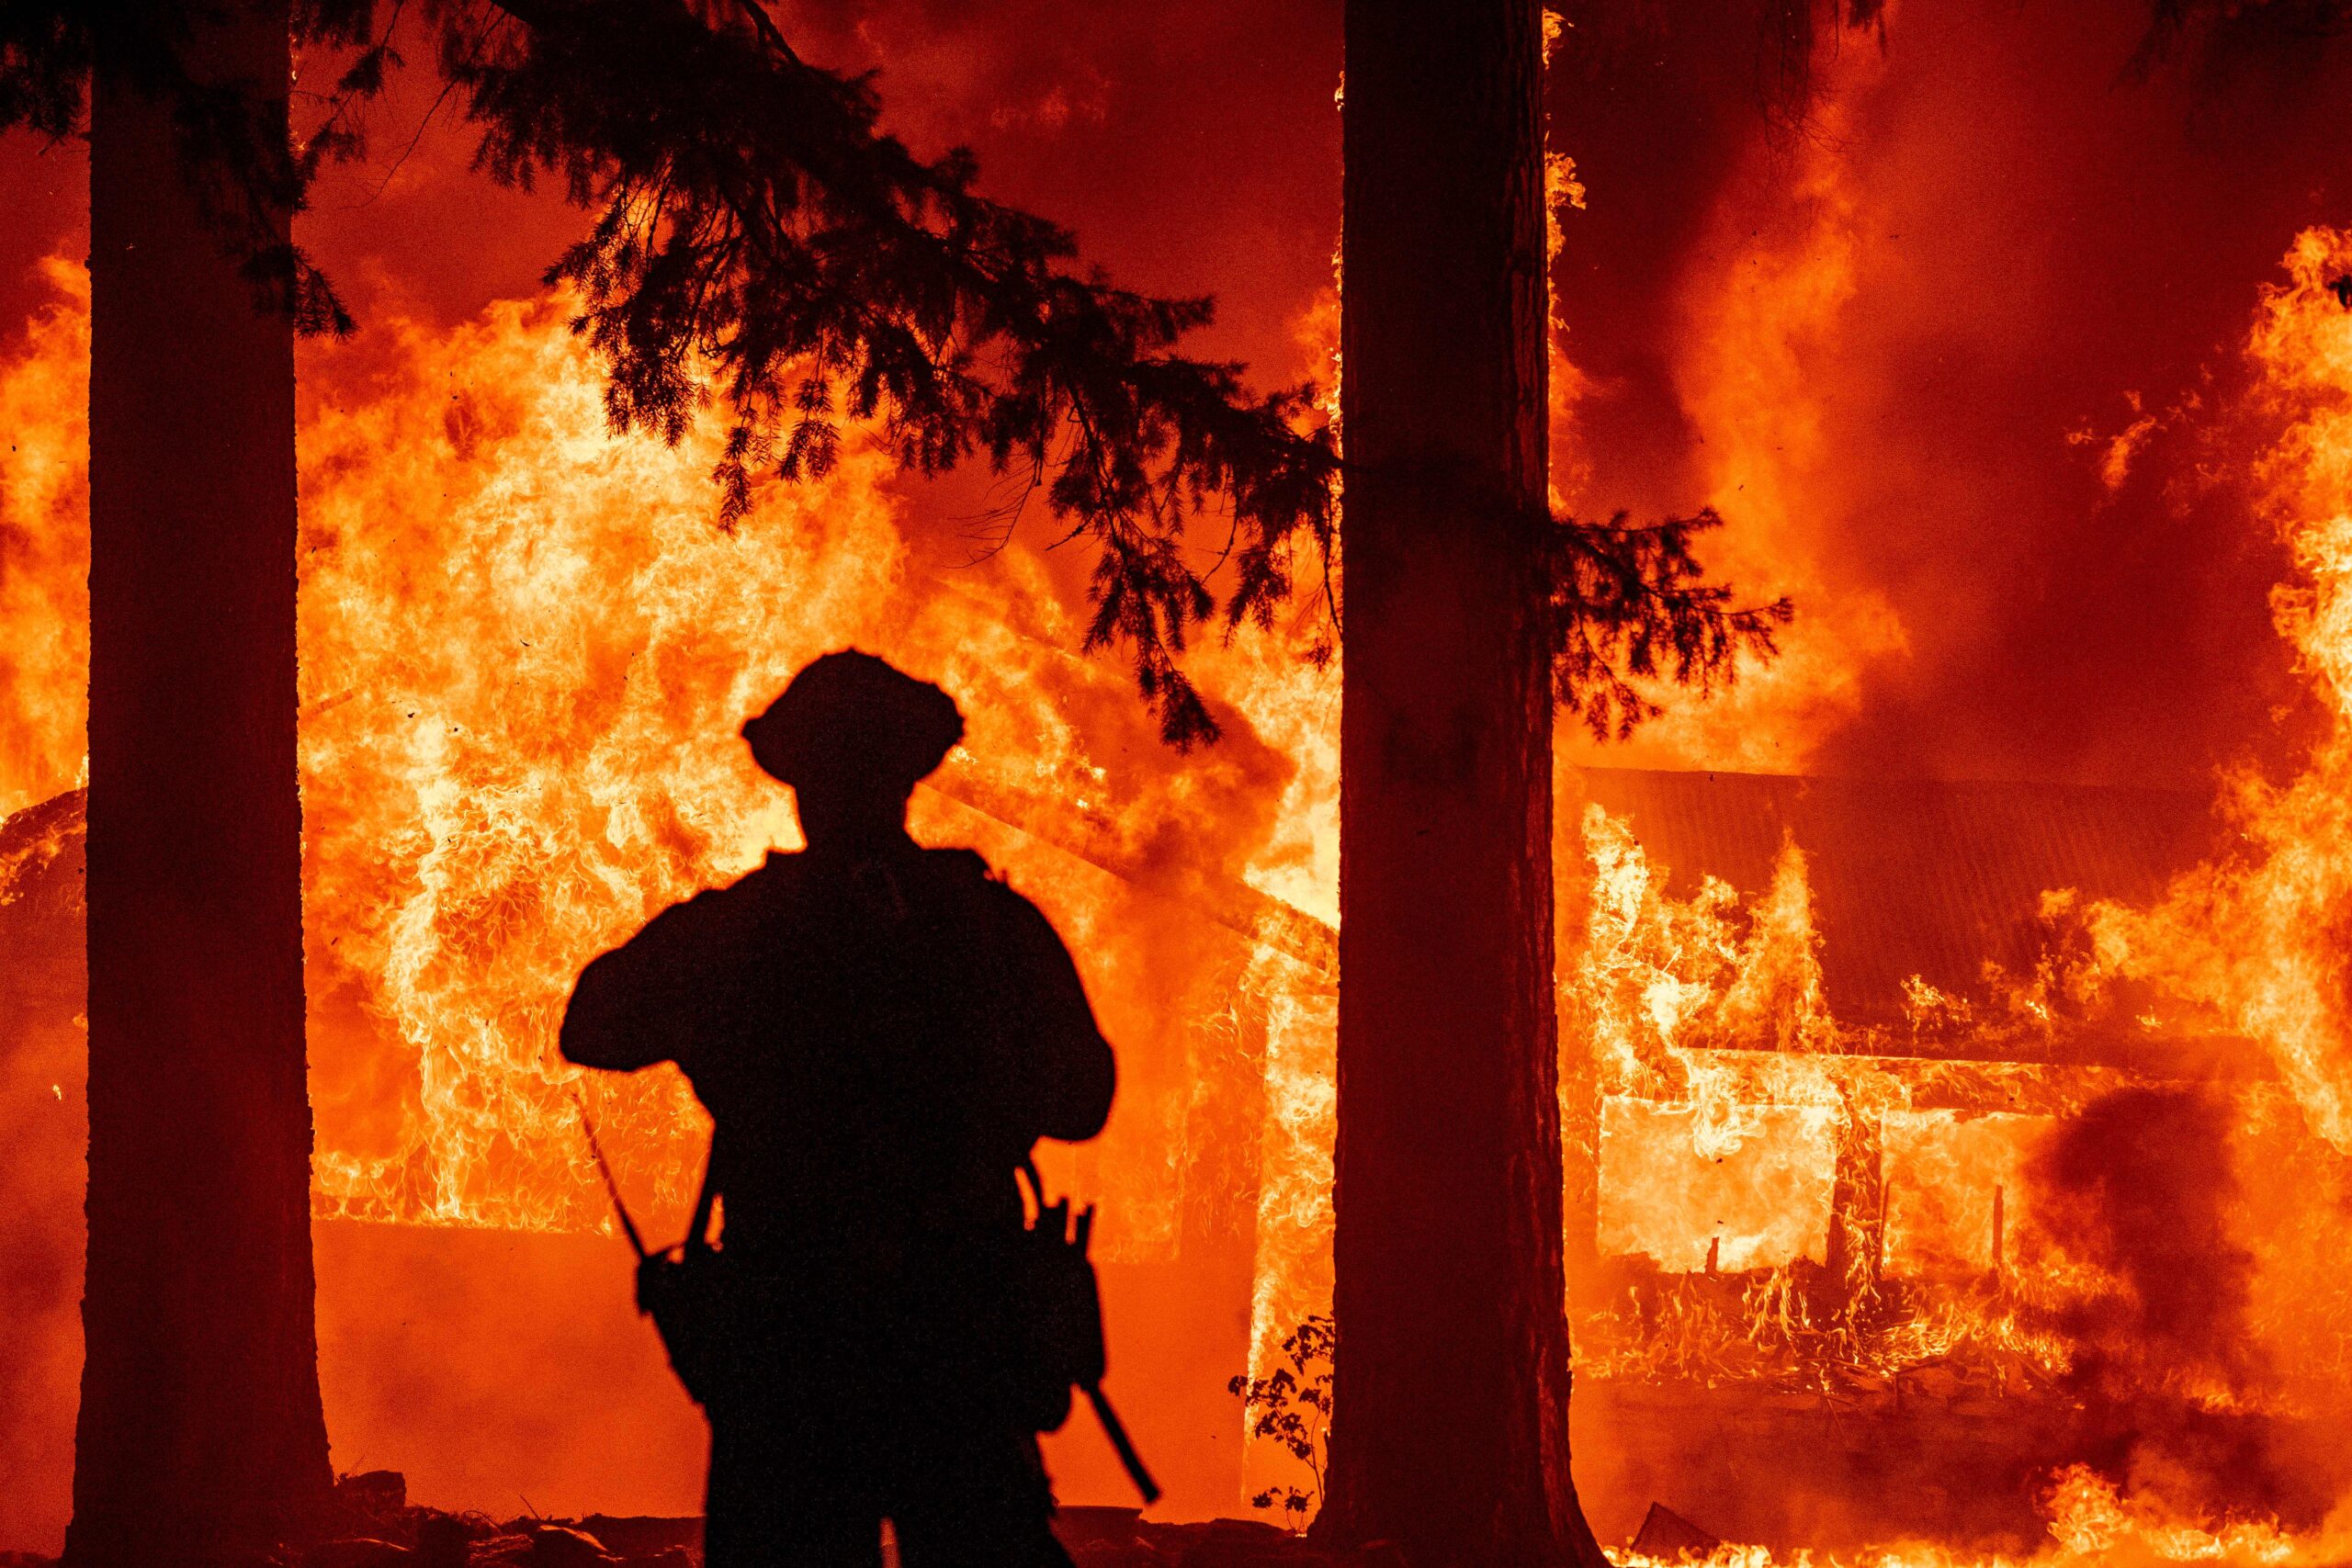 Firefighters try to get control of the scene as the Dixie fire burns dozens of homes in the Indian Falls neighborhood of unincorporated Plumas County, California on July 24, 2021. - The Dixie fire, which started only a few miles from the origin of the deadly Camp fire, has churned through more than 185,000 acres and continues to burn towards rural communities. (Photo by JOSH EDELSON / AFP)